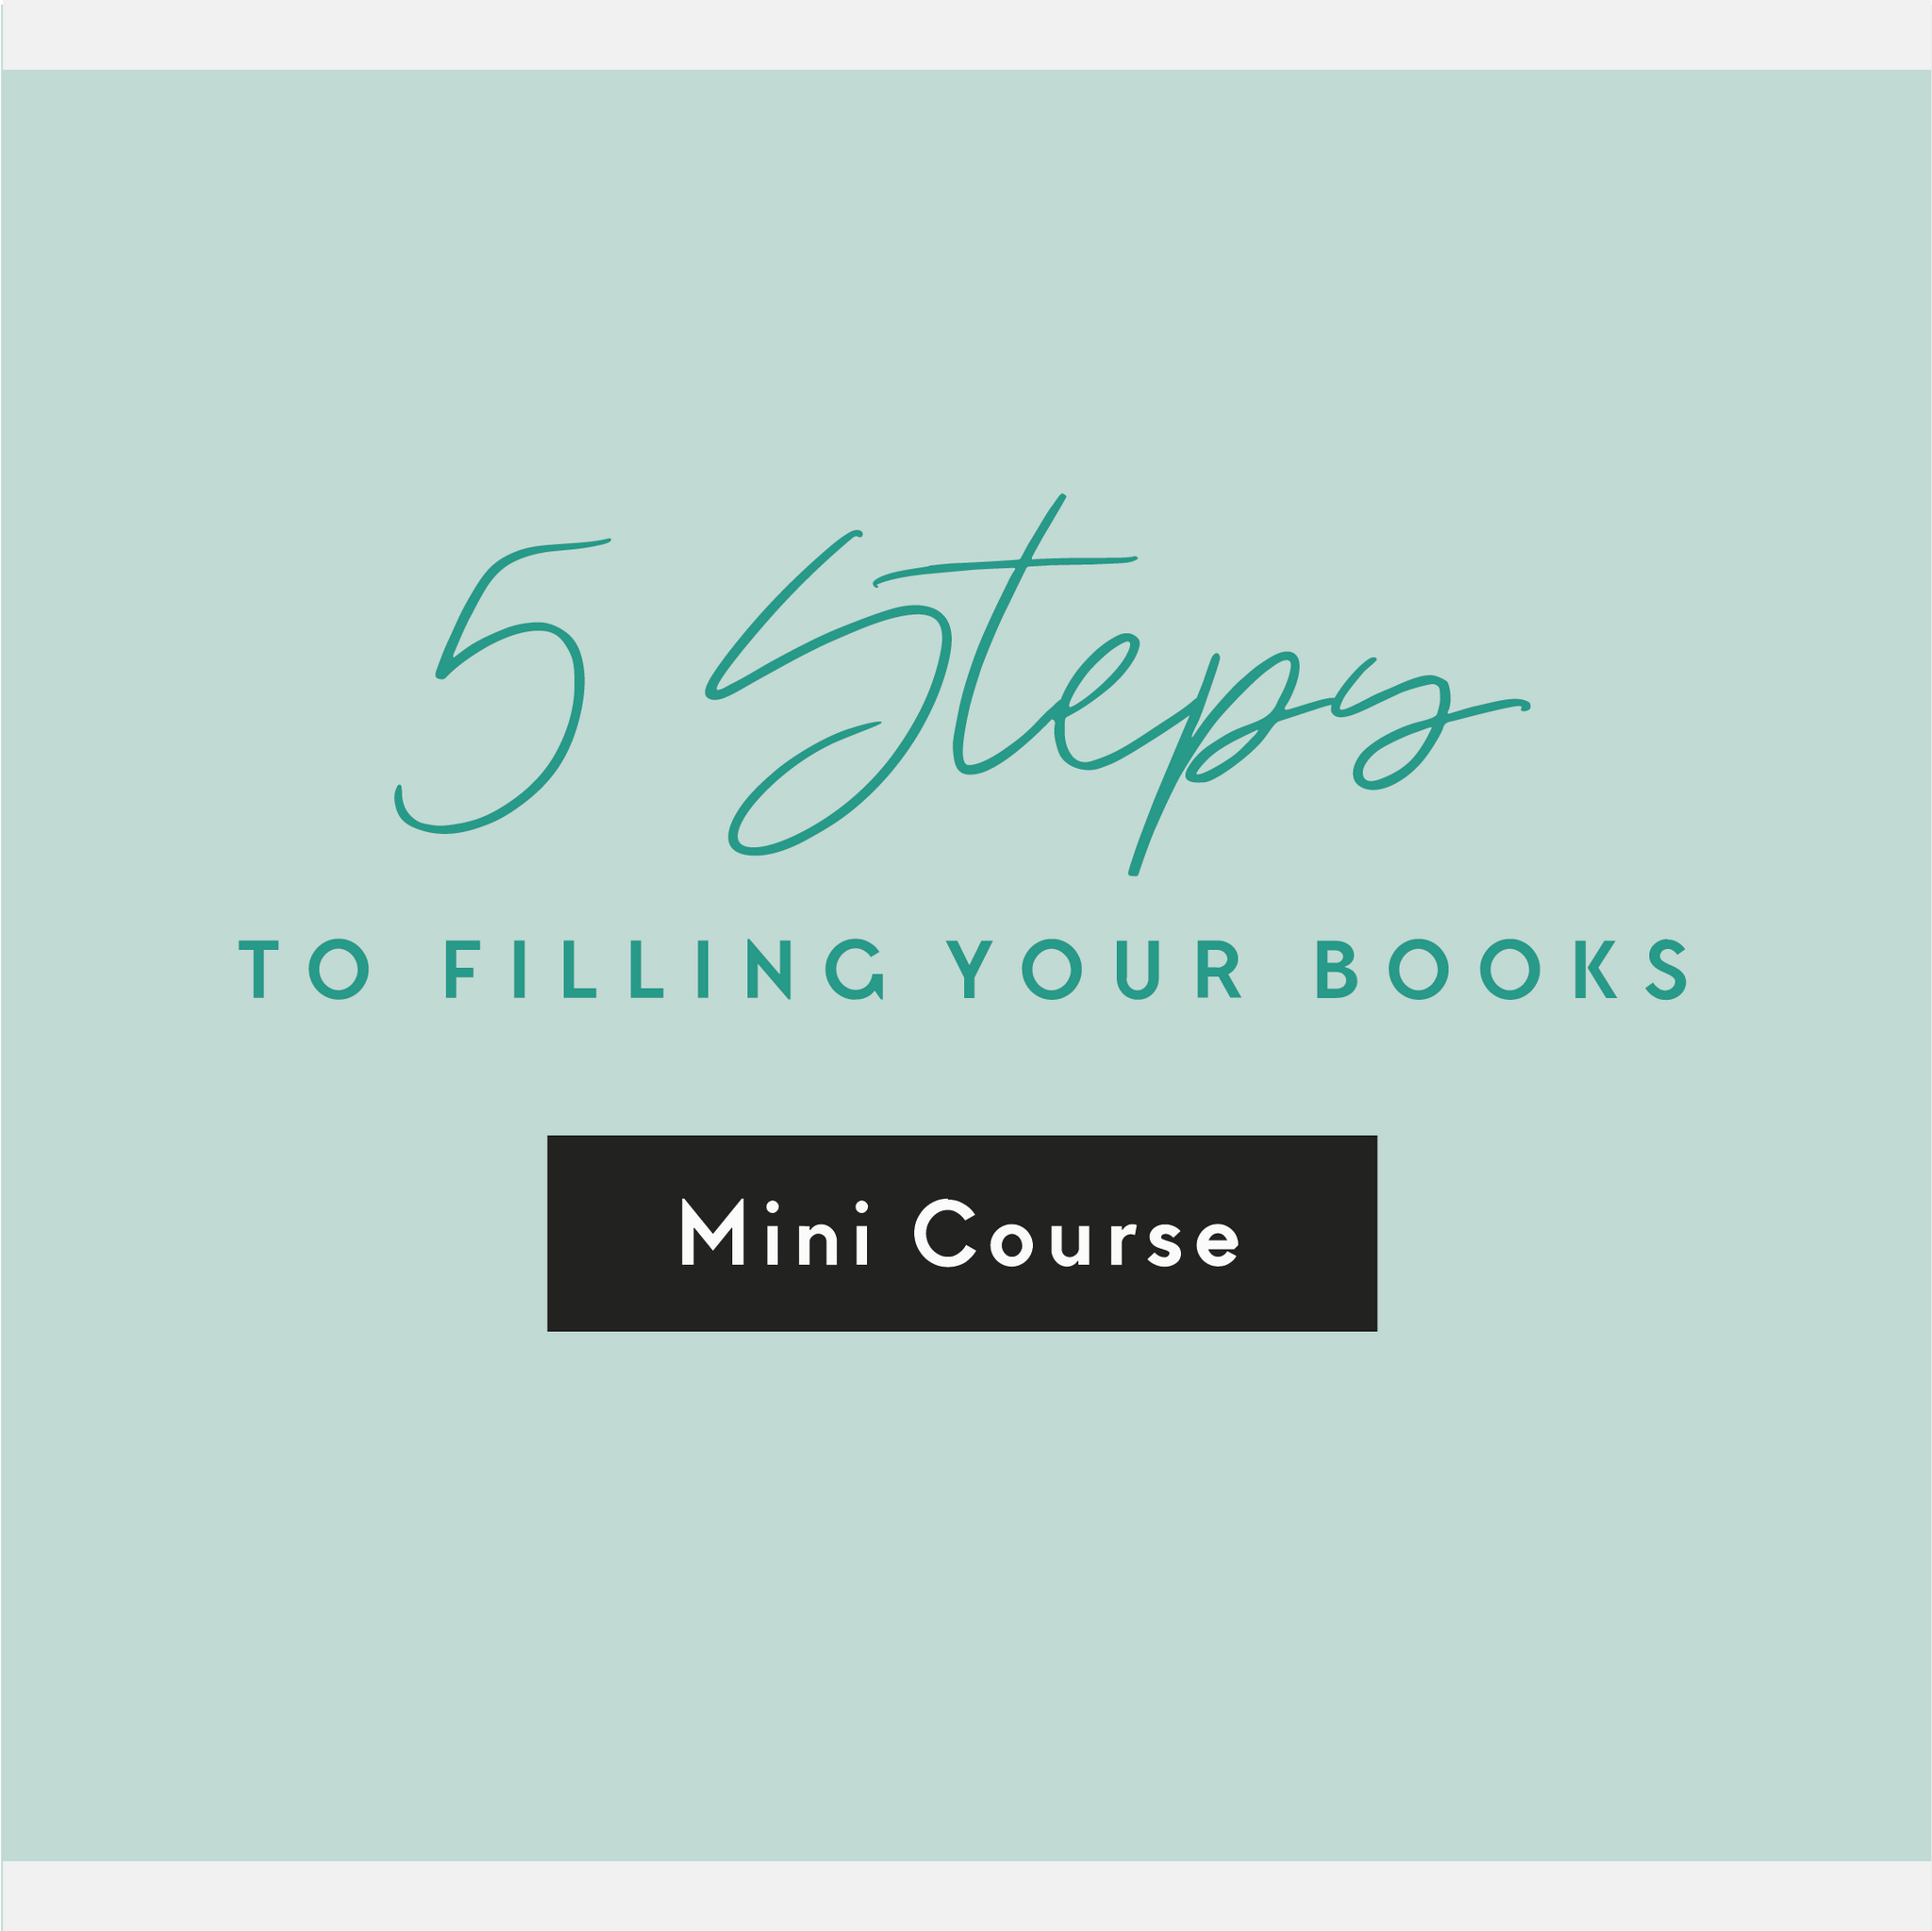 5 Steps To Filling Your Books